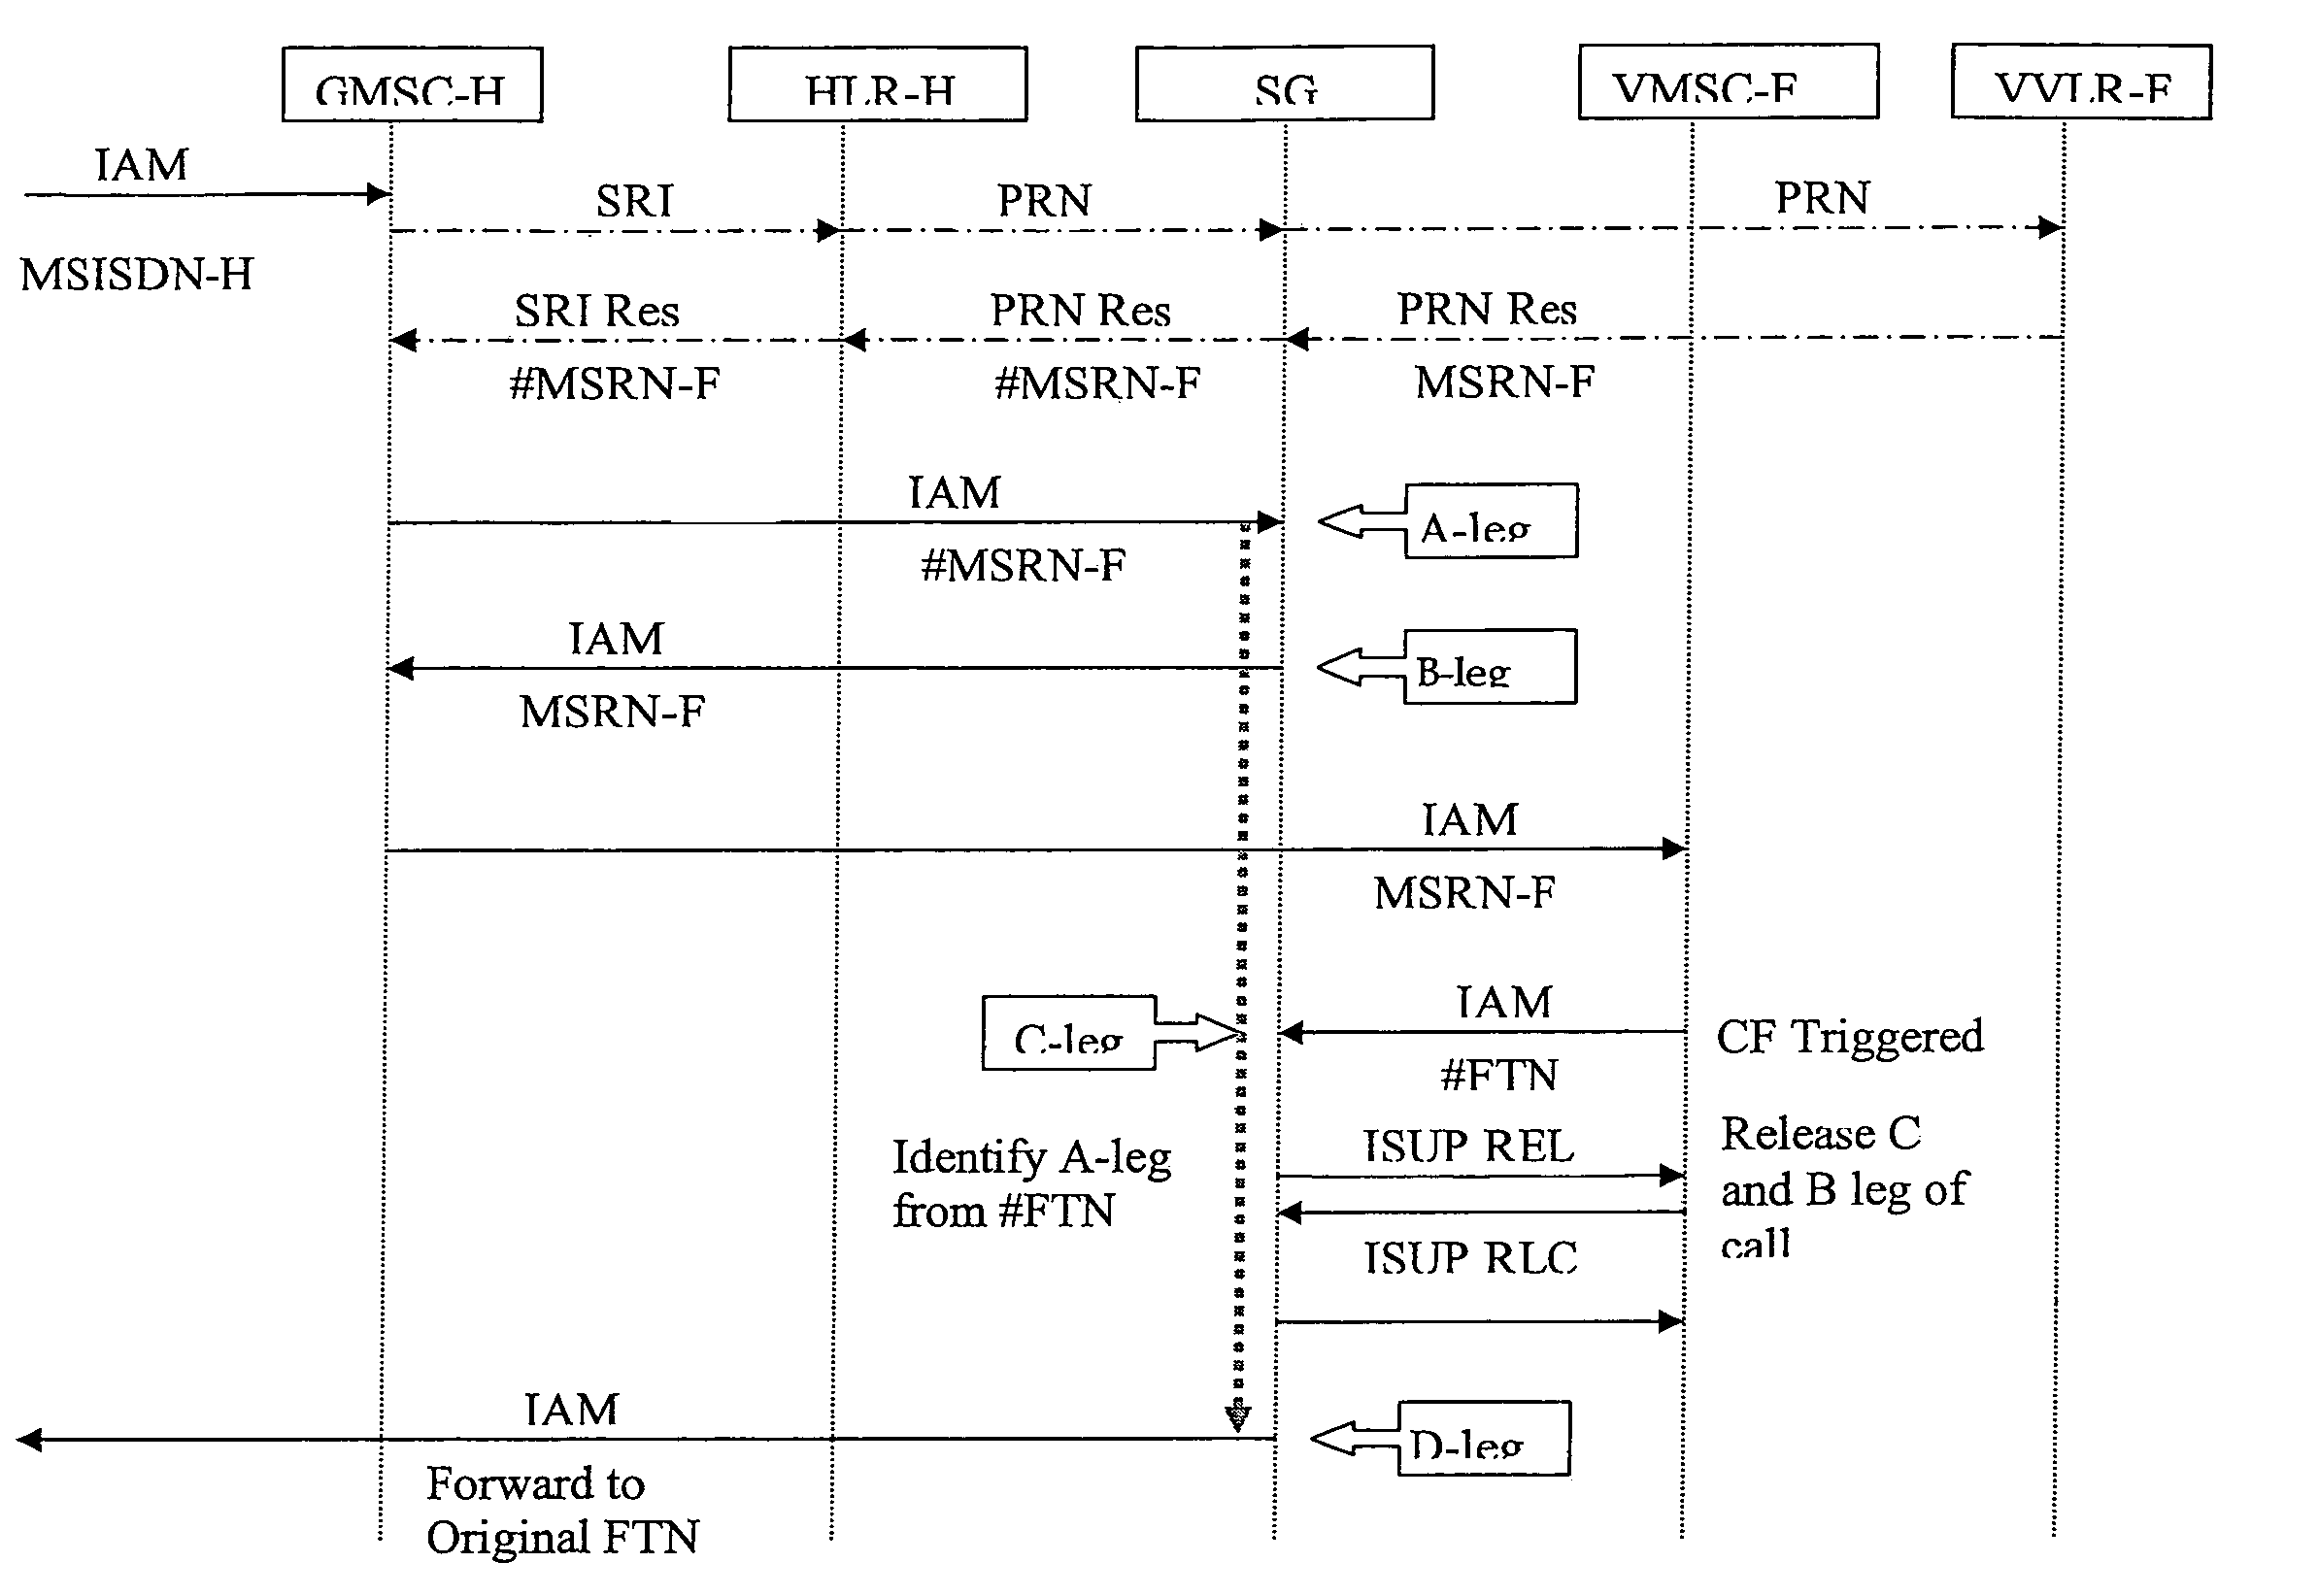 Signaling gateway with multiple IMSI with multiple MSISDN(MIMM) service in a single SIM for multiple roaming partners